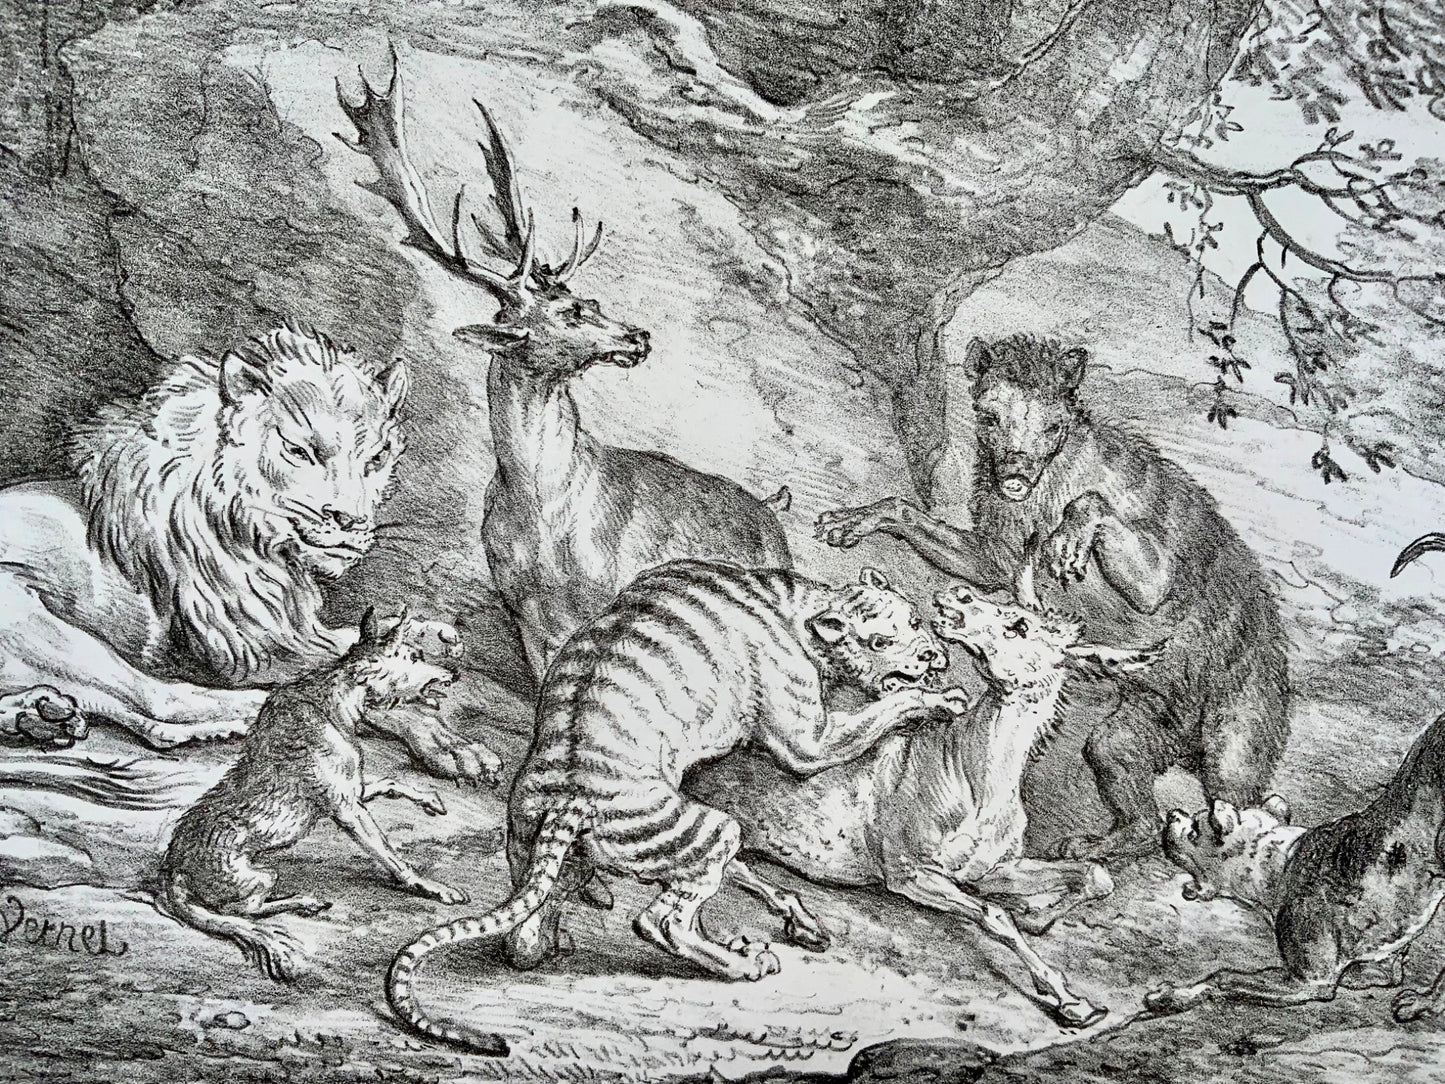 1818 ‘Incunabula of Lithography’ Carle Vernet, G. Engelmann, Bestiary, Lion